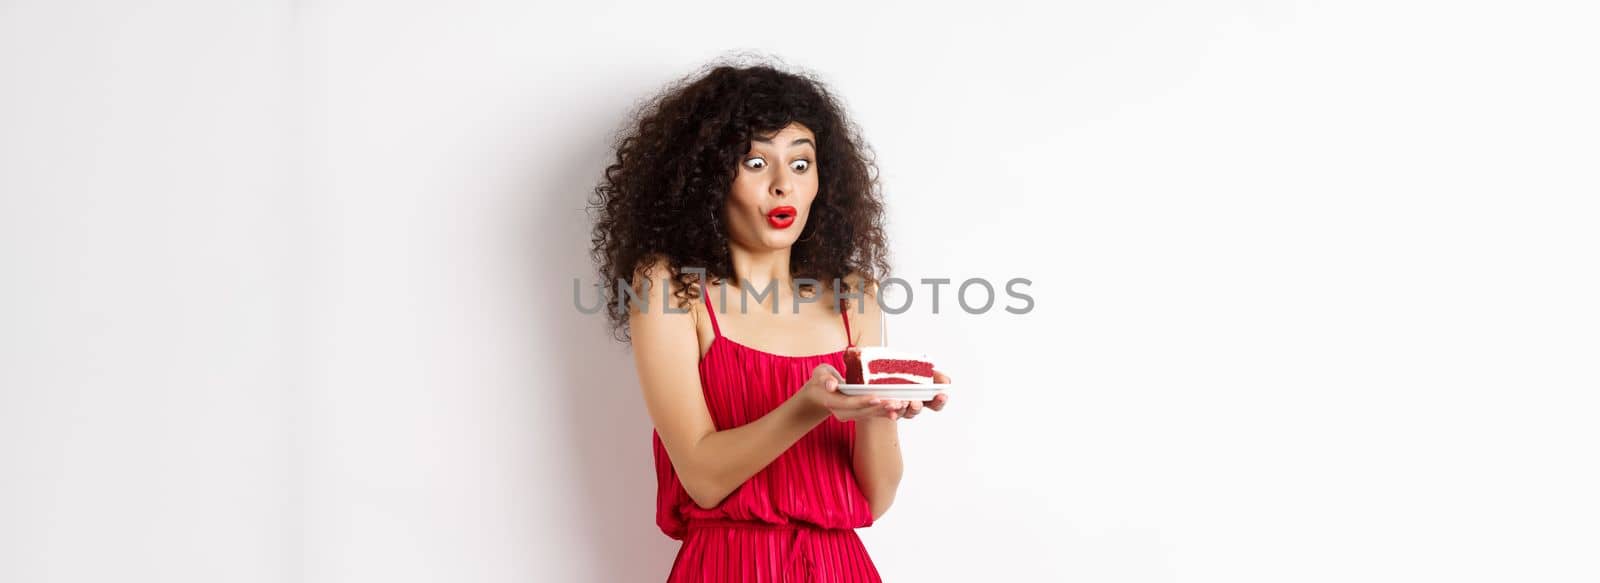 Excited birthday girl in red dress blowing candle on cake and making wish, standing on white background.